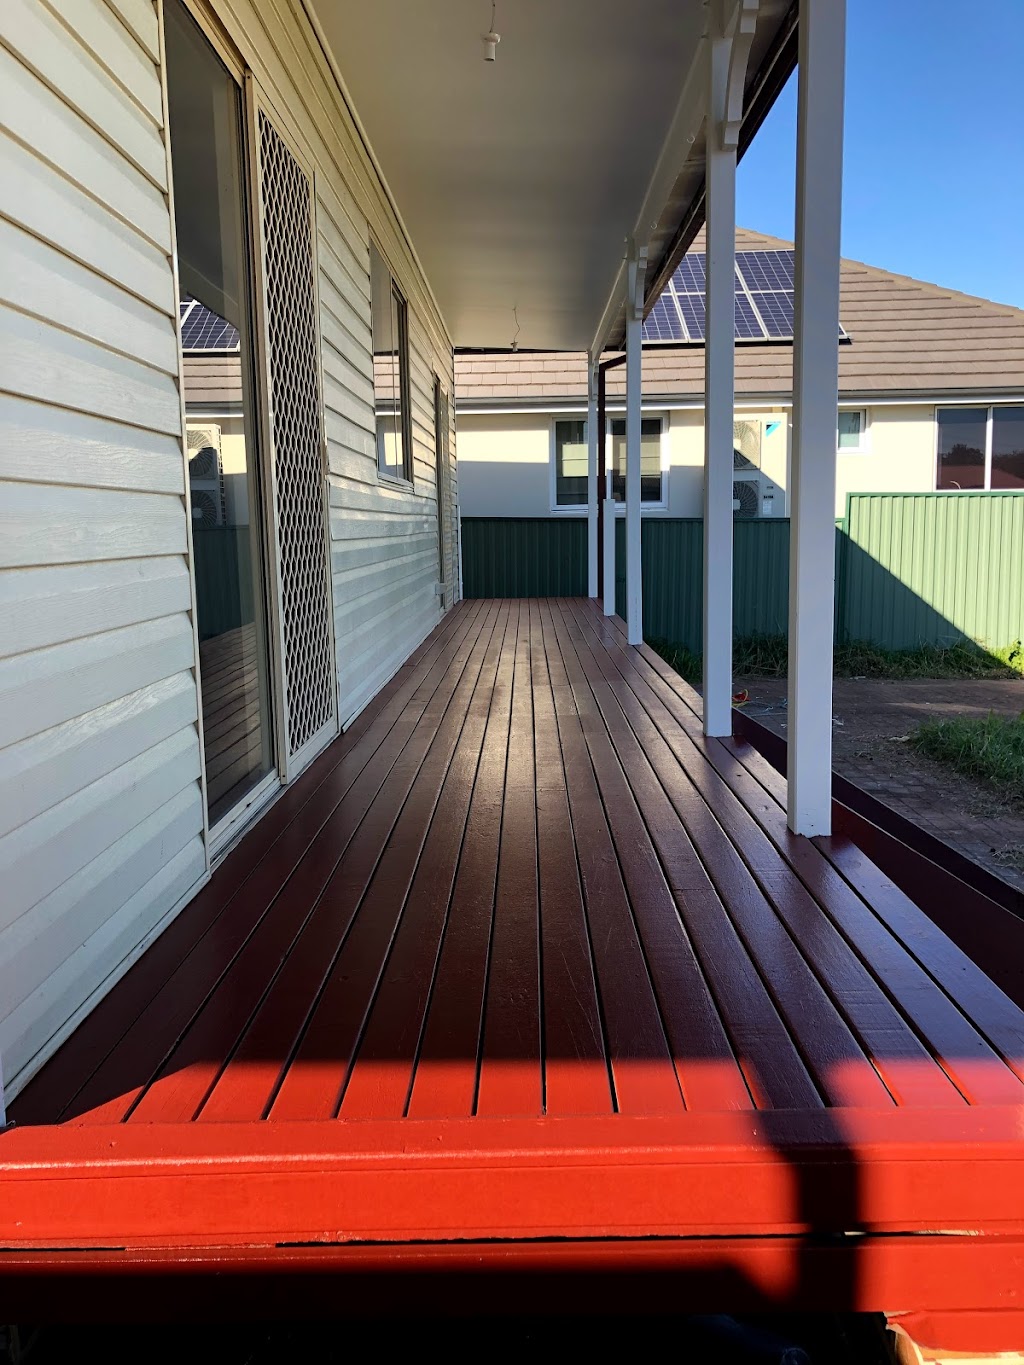 Spotless painting and coatings group PtyLtd | Dorre Pl, Green Valley NSW 2168, Australia | Phone: 1800 595 519